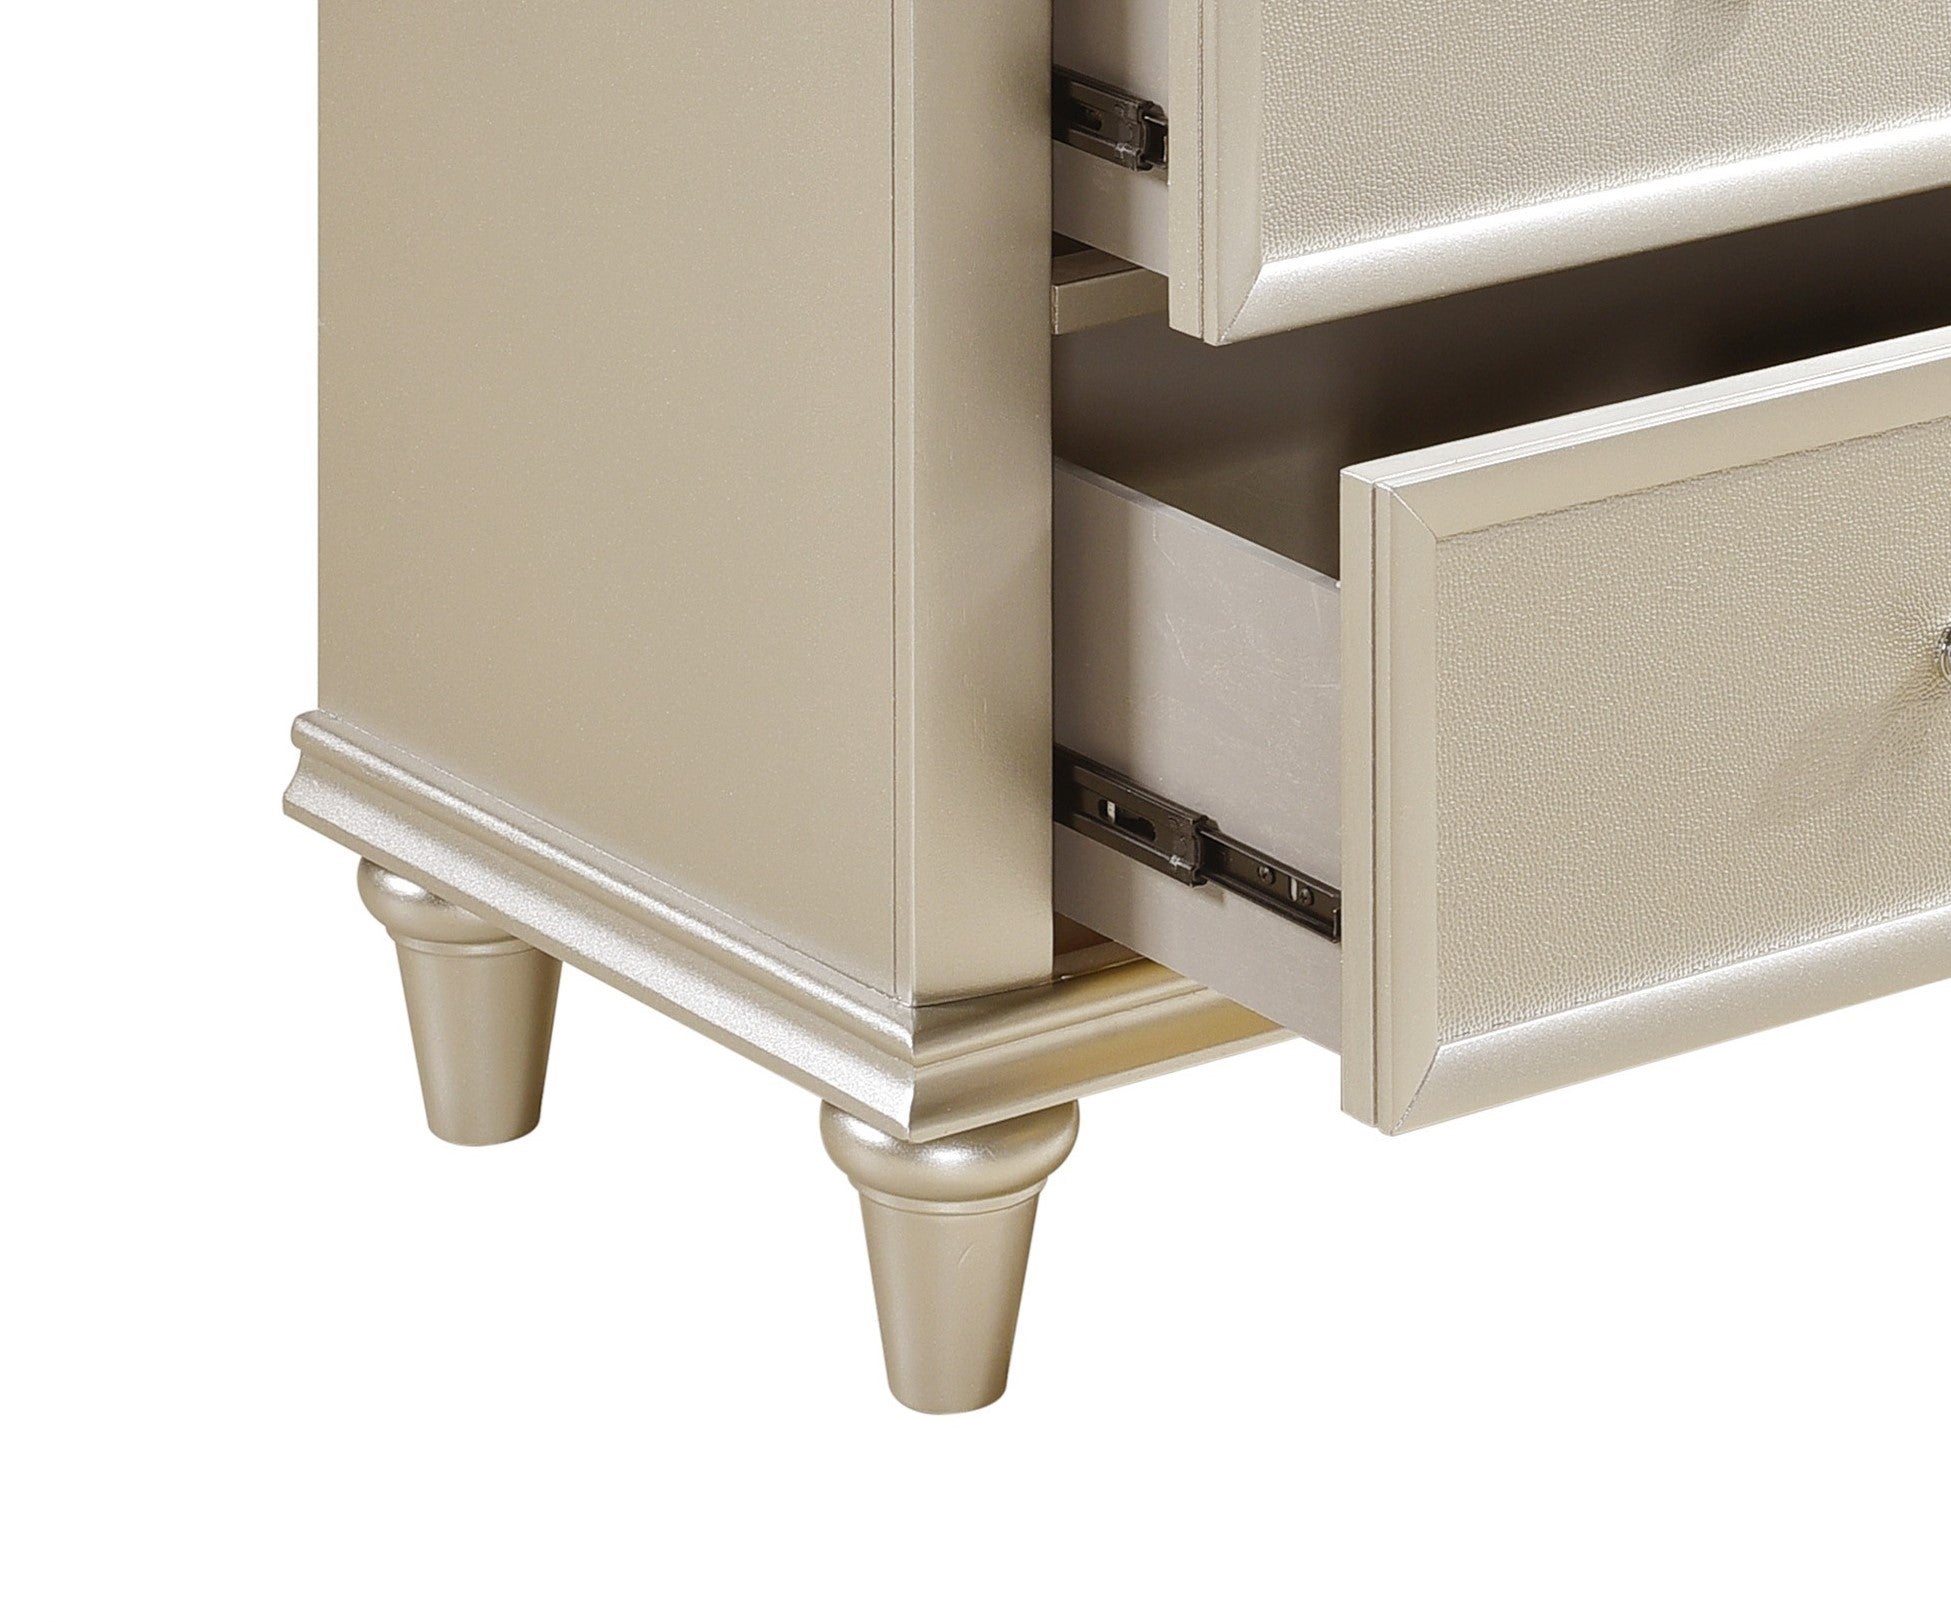 Silver Finish 1pc Nightstand of Textural Drawer Fronts silver-2 drawers-bedroom-wood